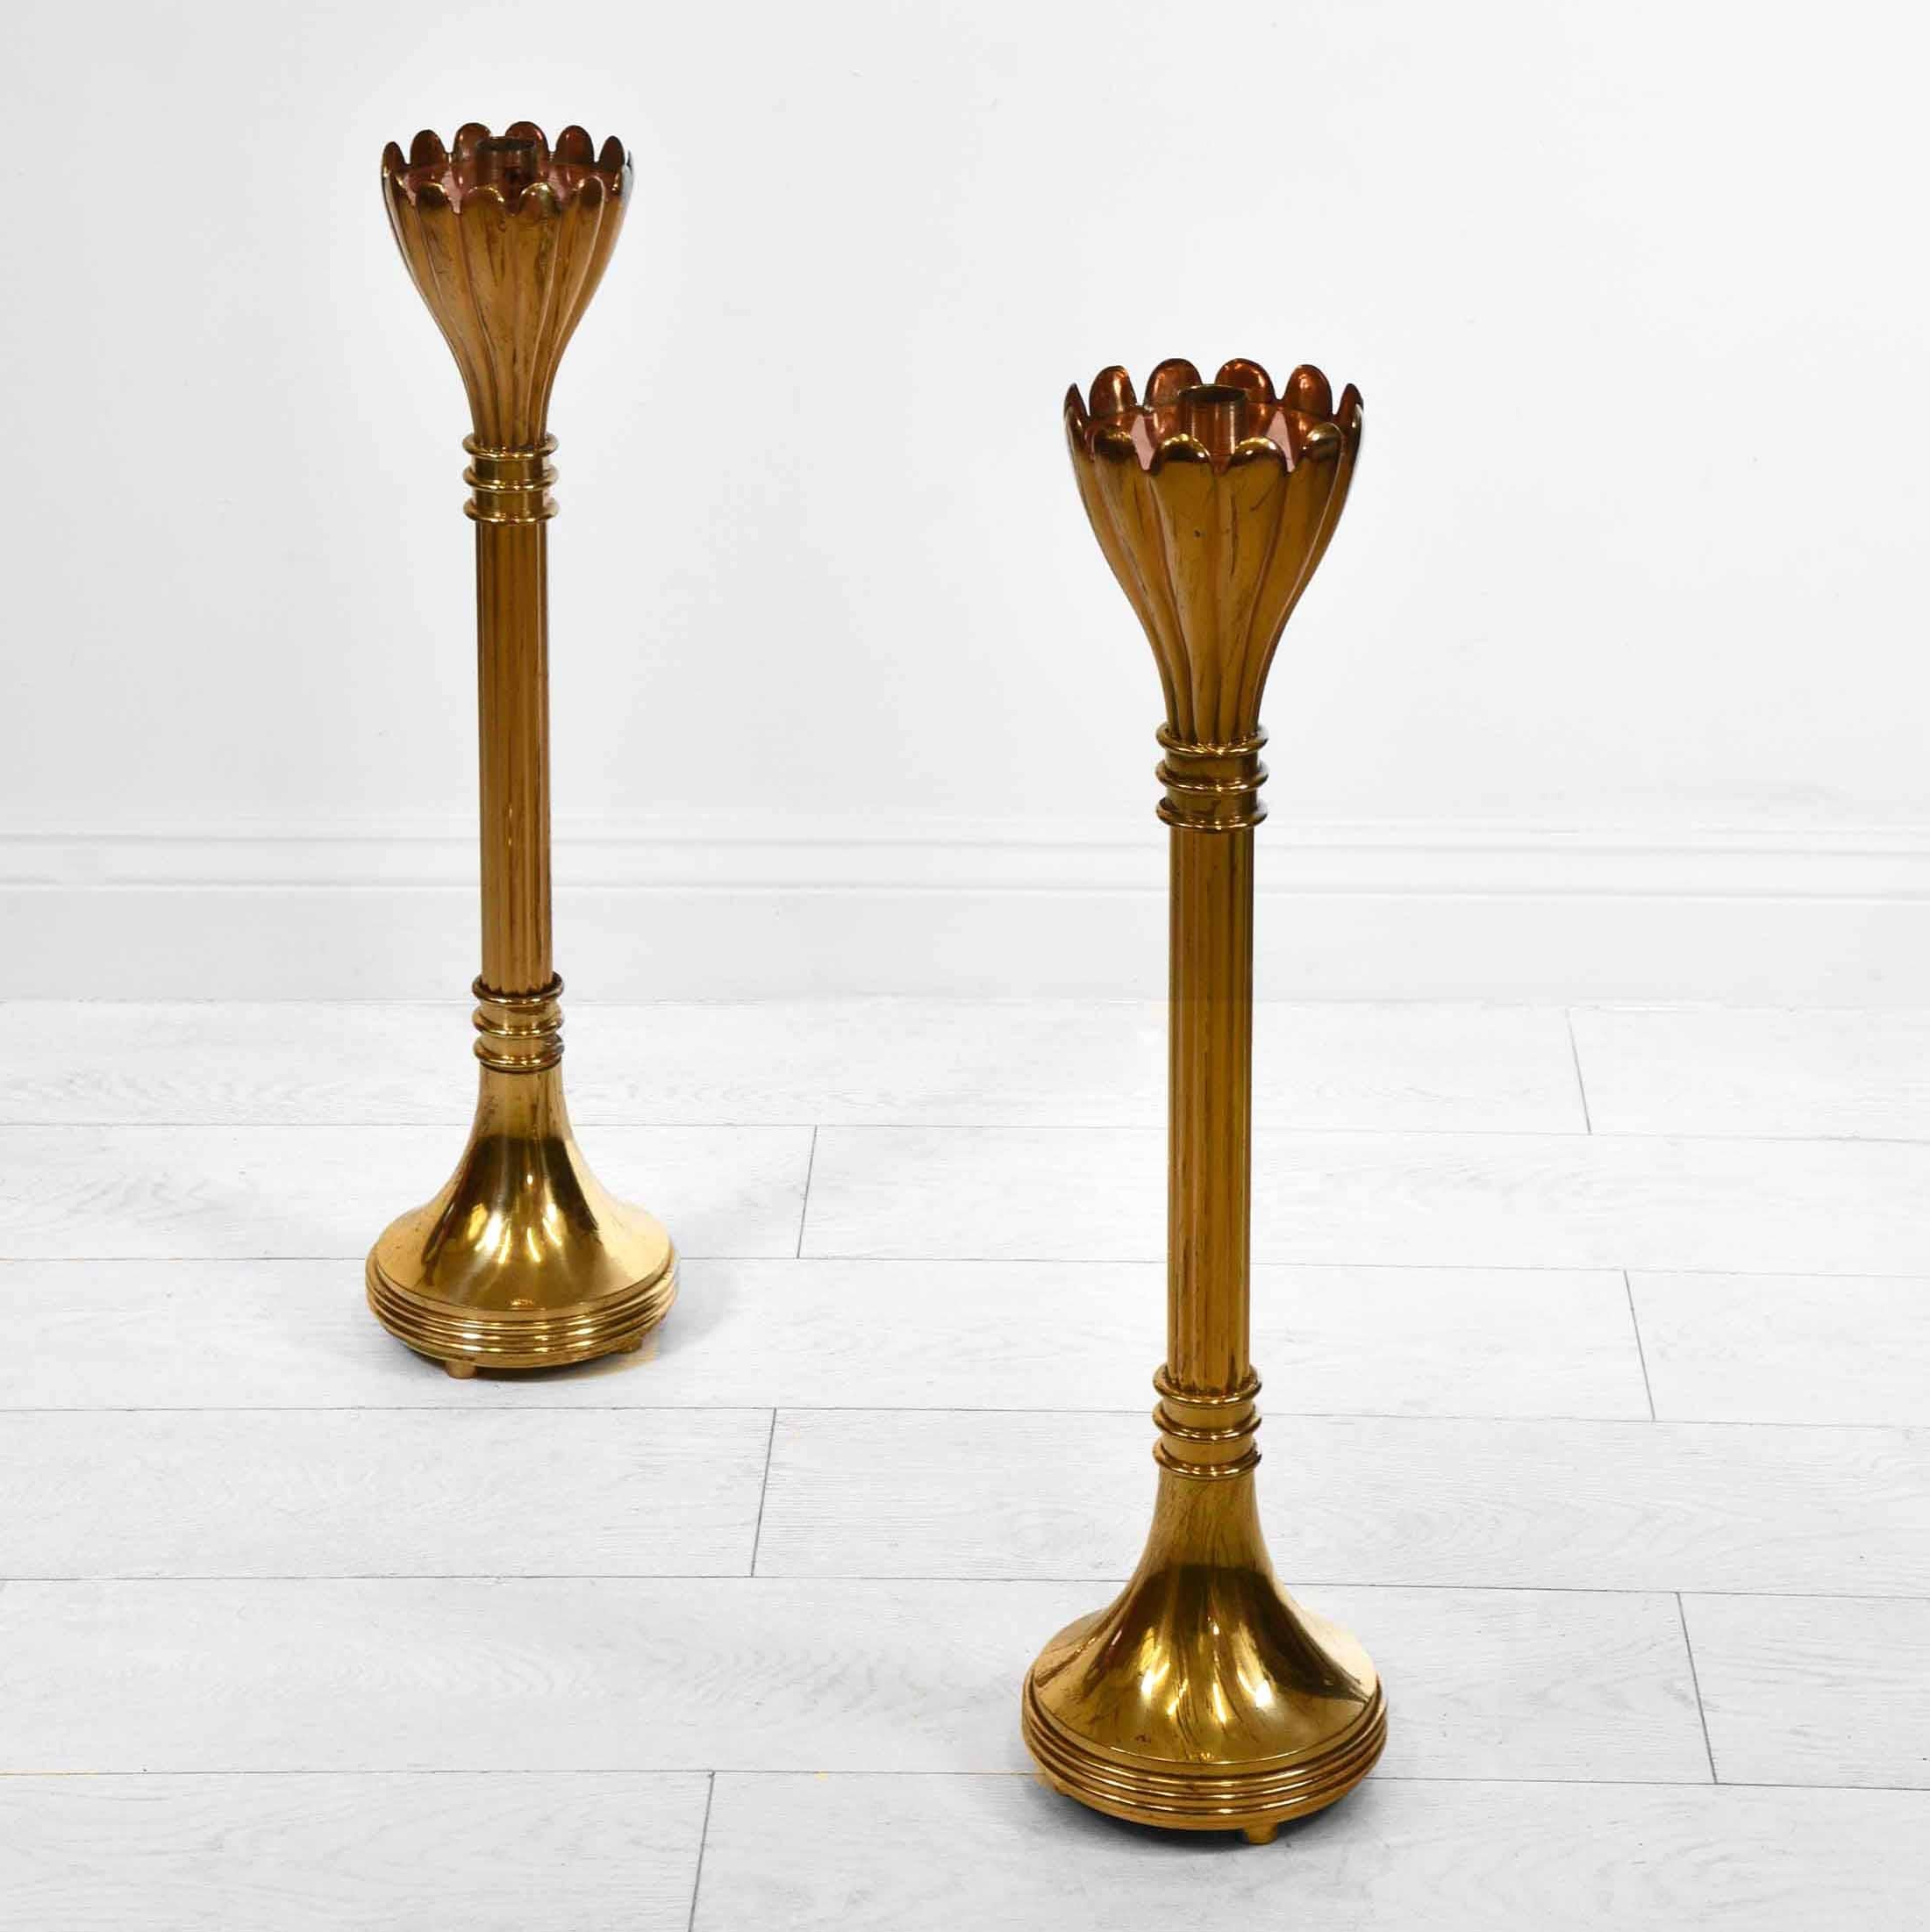 20th Century Pair of Brass & Copper Floor Standing Candle Stands with Flared Scalloped Uppers